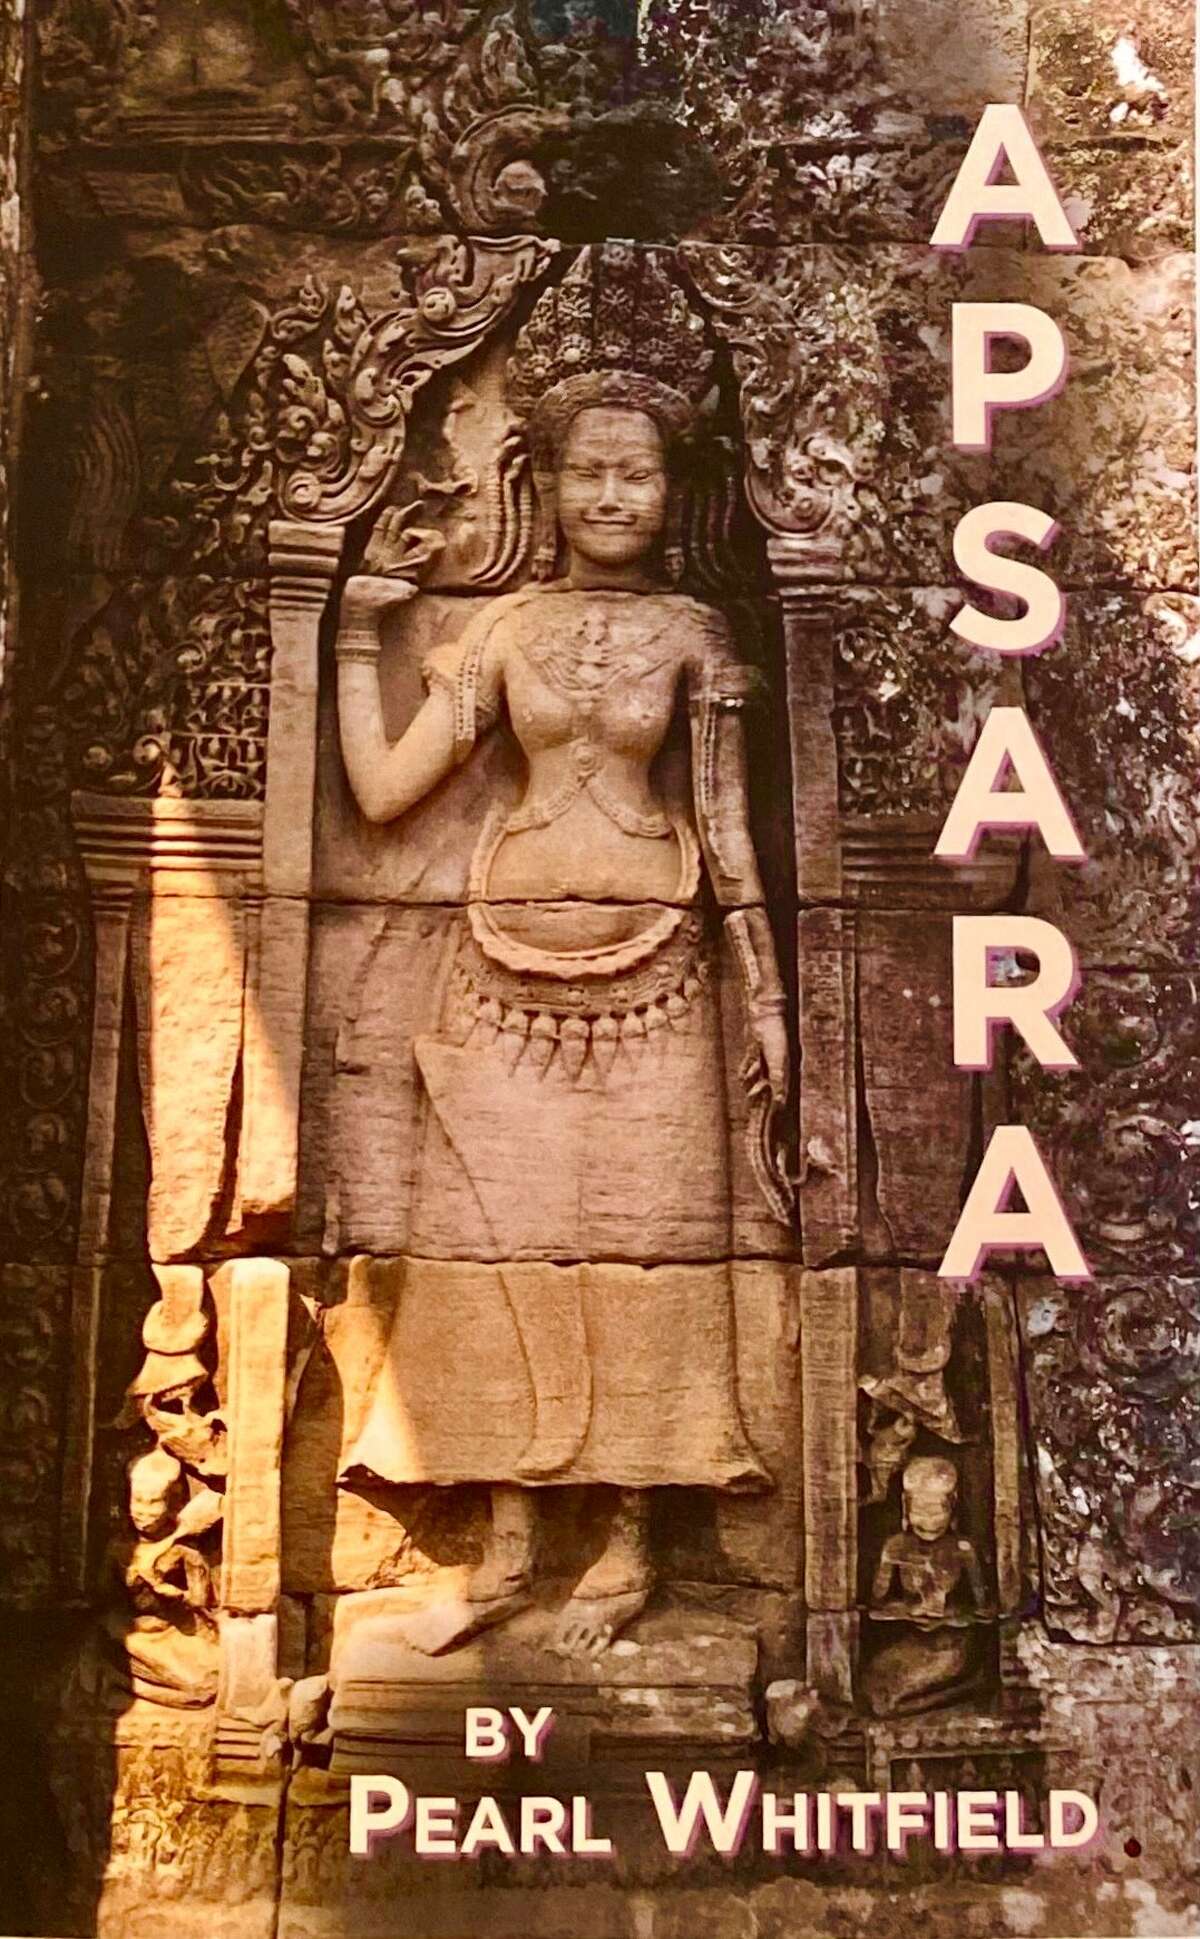 Author Pearl Whitfield will read from her book, “APSARA” on Friday, (April 29, 2022) at Unger Memorial Library. The event will be from 1-3 p.m. at the library, 825 Austin St.